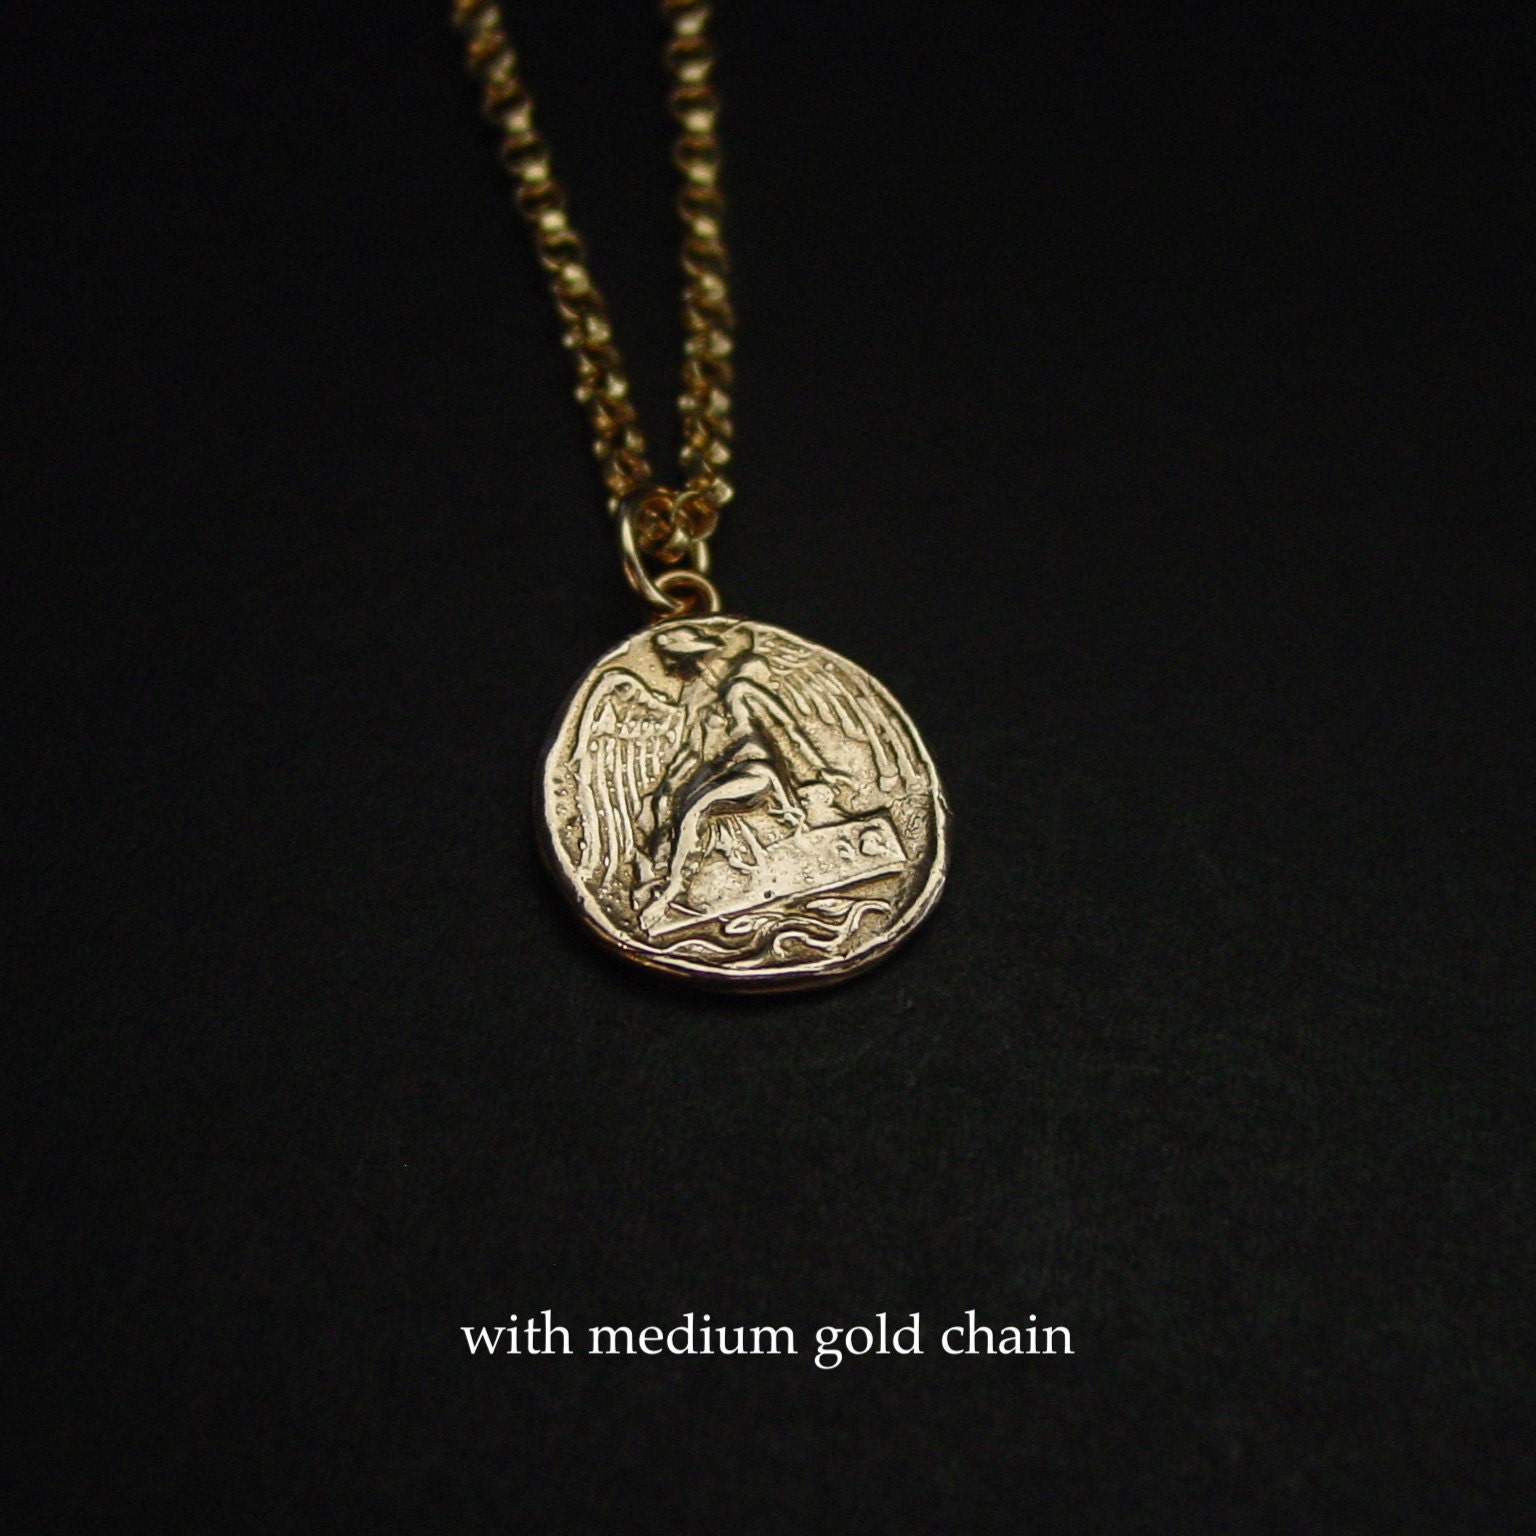 Nike Goddess Necklace - Goddess of Victory - Winged Victory of Samothrace - Ancient Rome - Coin Necklace - Percy Jackson